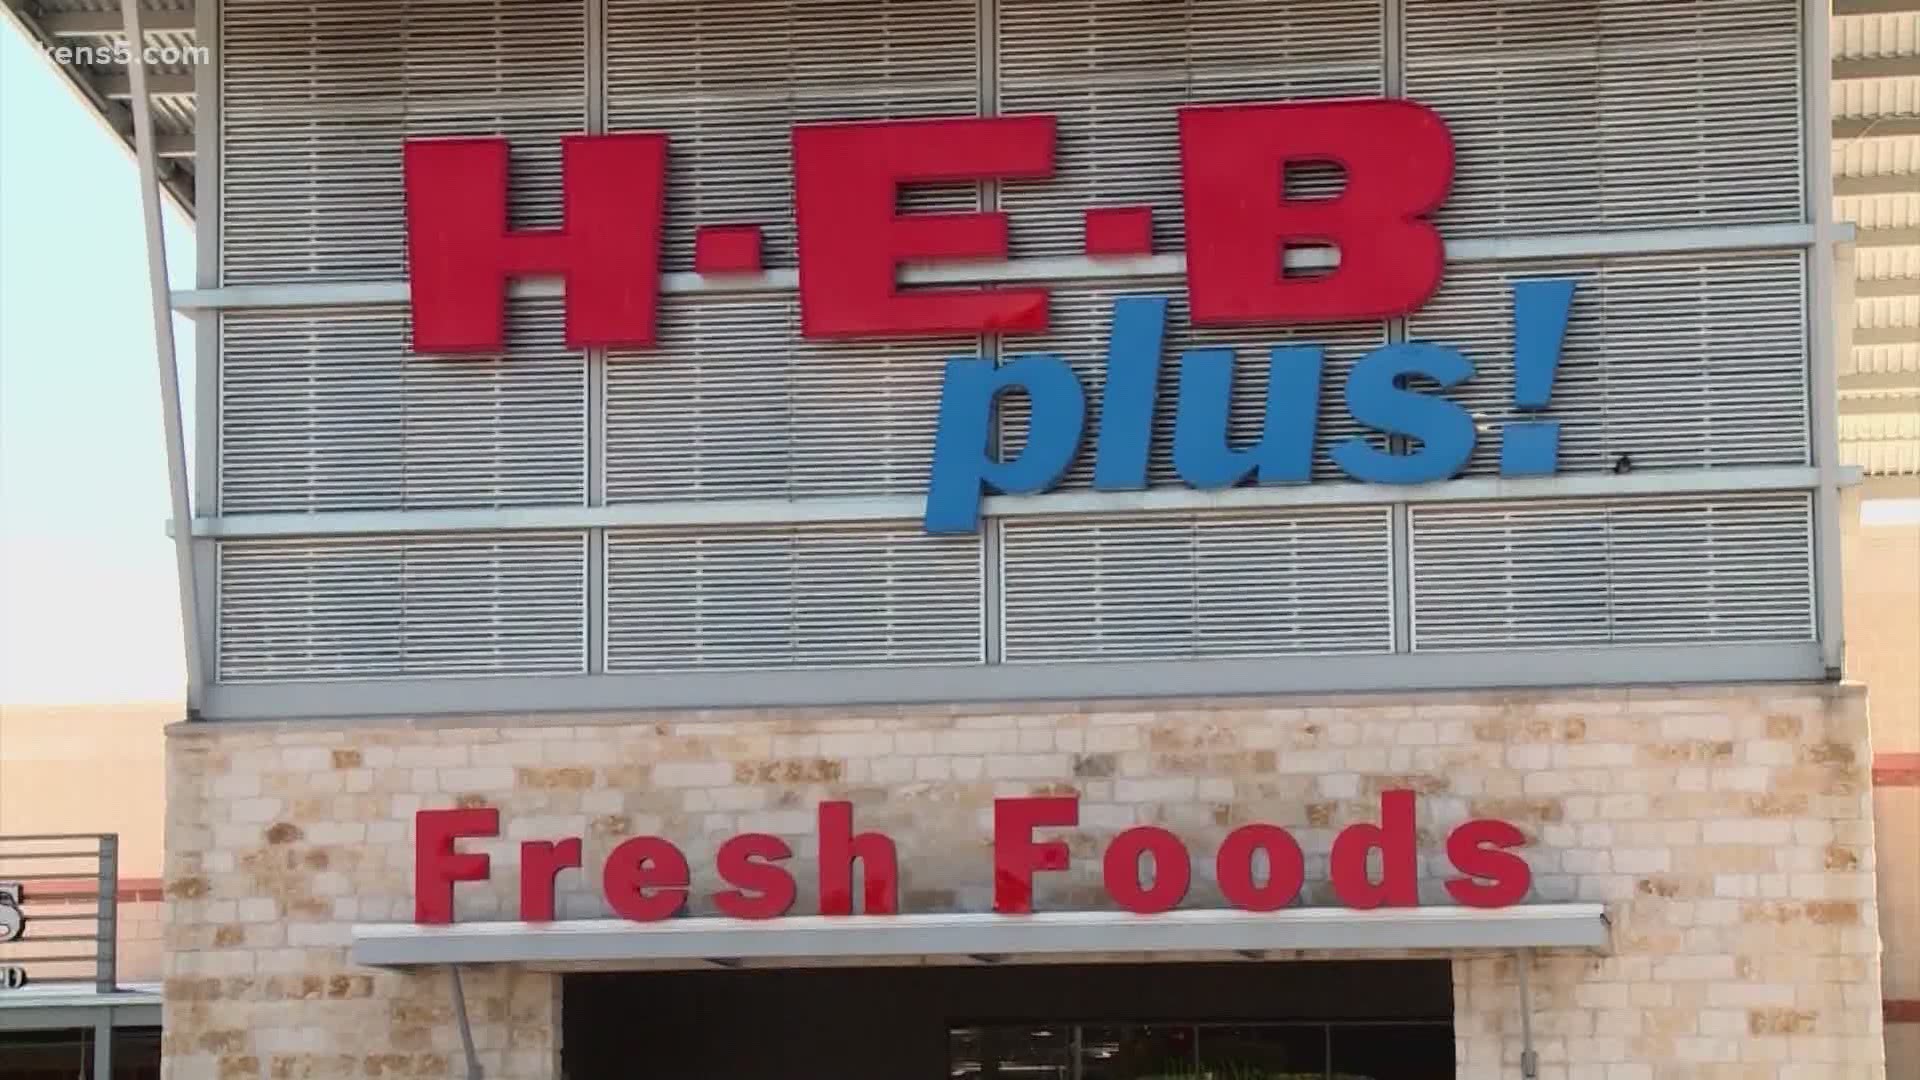 Each time a shopper buys an H-E-B product, the grocery chain will donate to Feeding Texas.